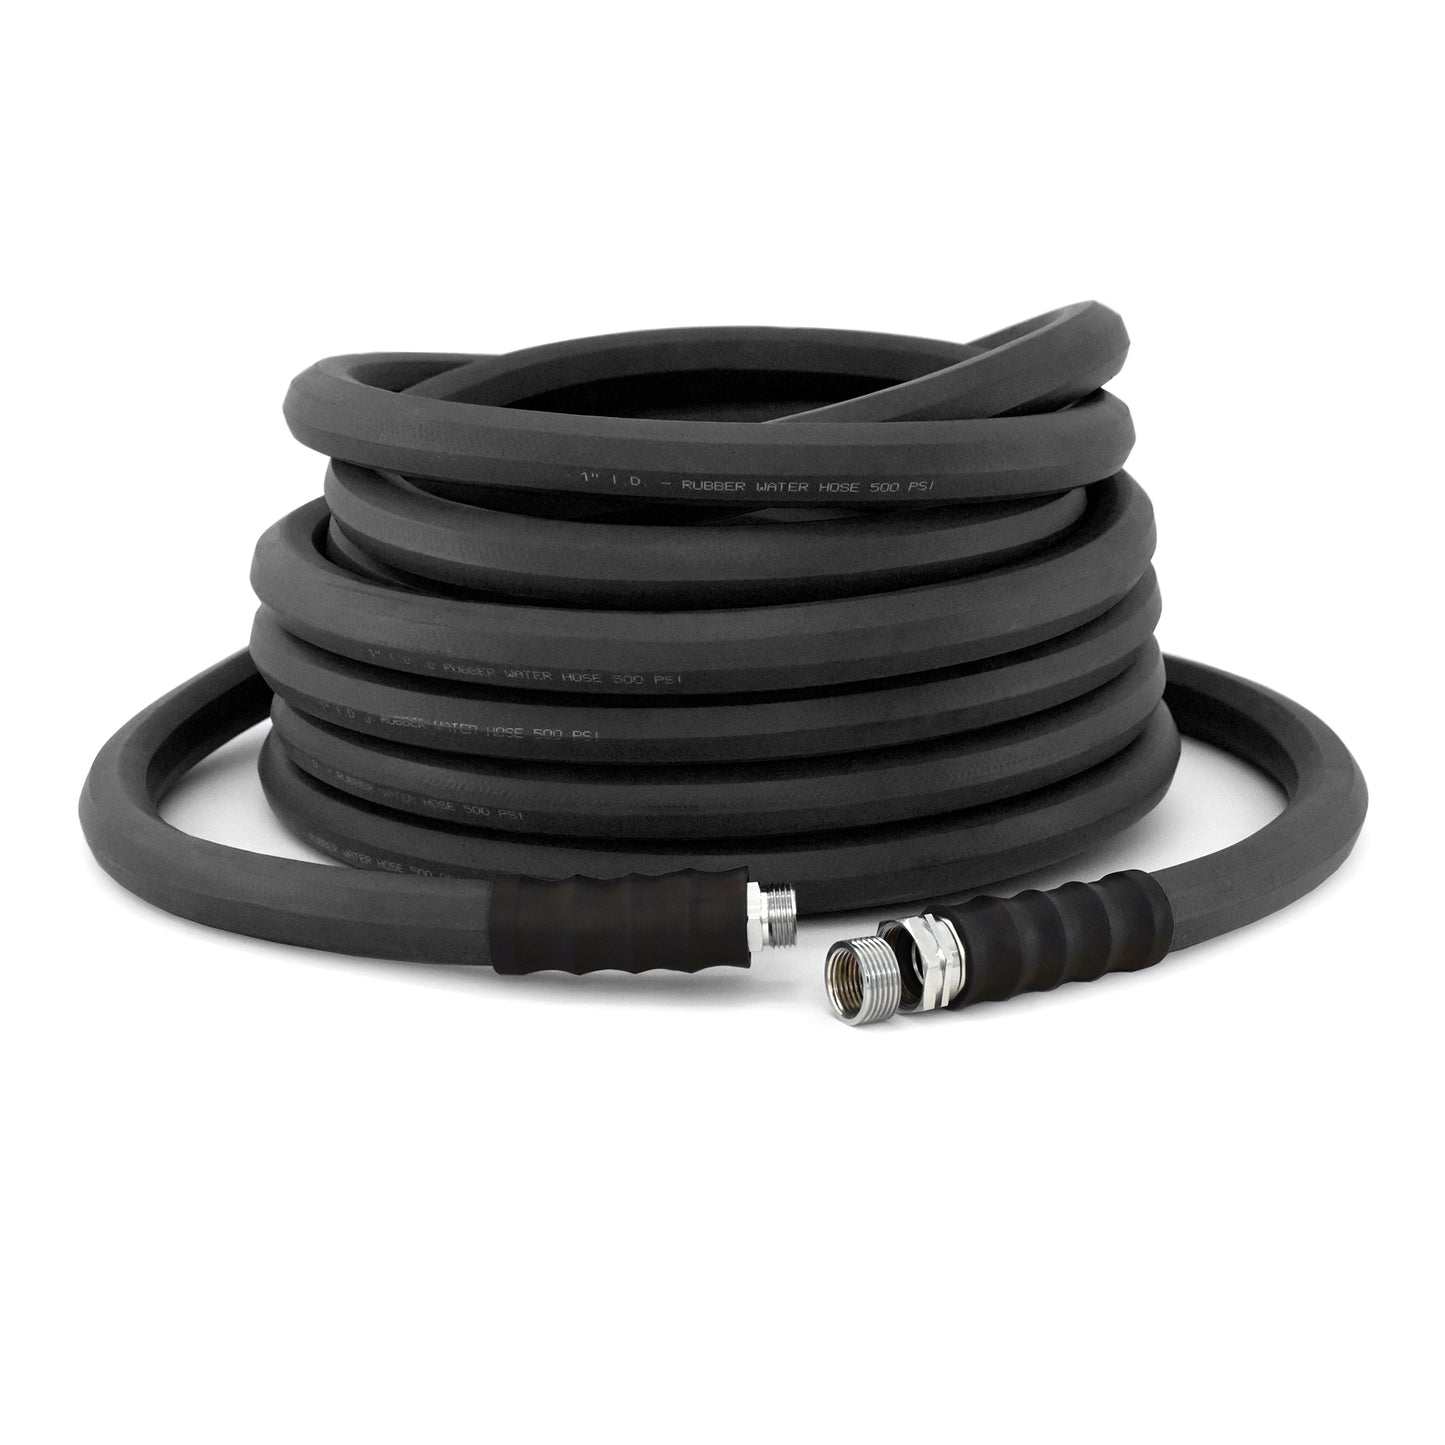 Avagard 5/8" Rubber Garden Hose | Contractor Grade | Supports Hot & Cold Water |  3/4" GHT Brass Fittings | 15 & 25 Ft